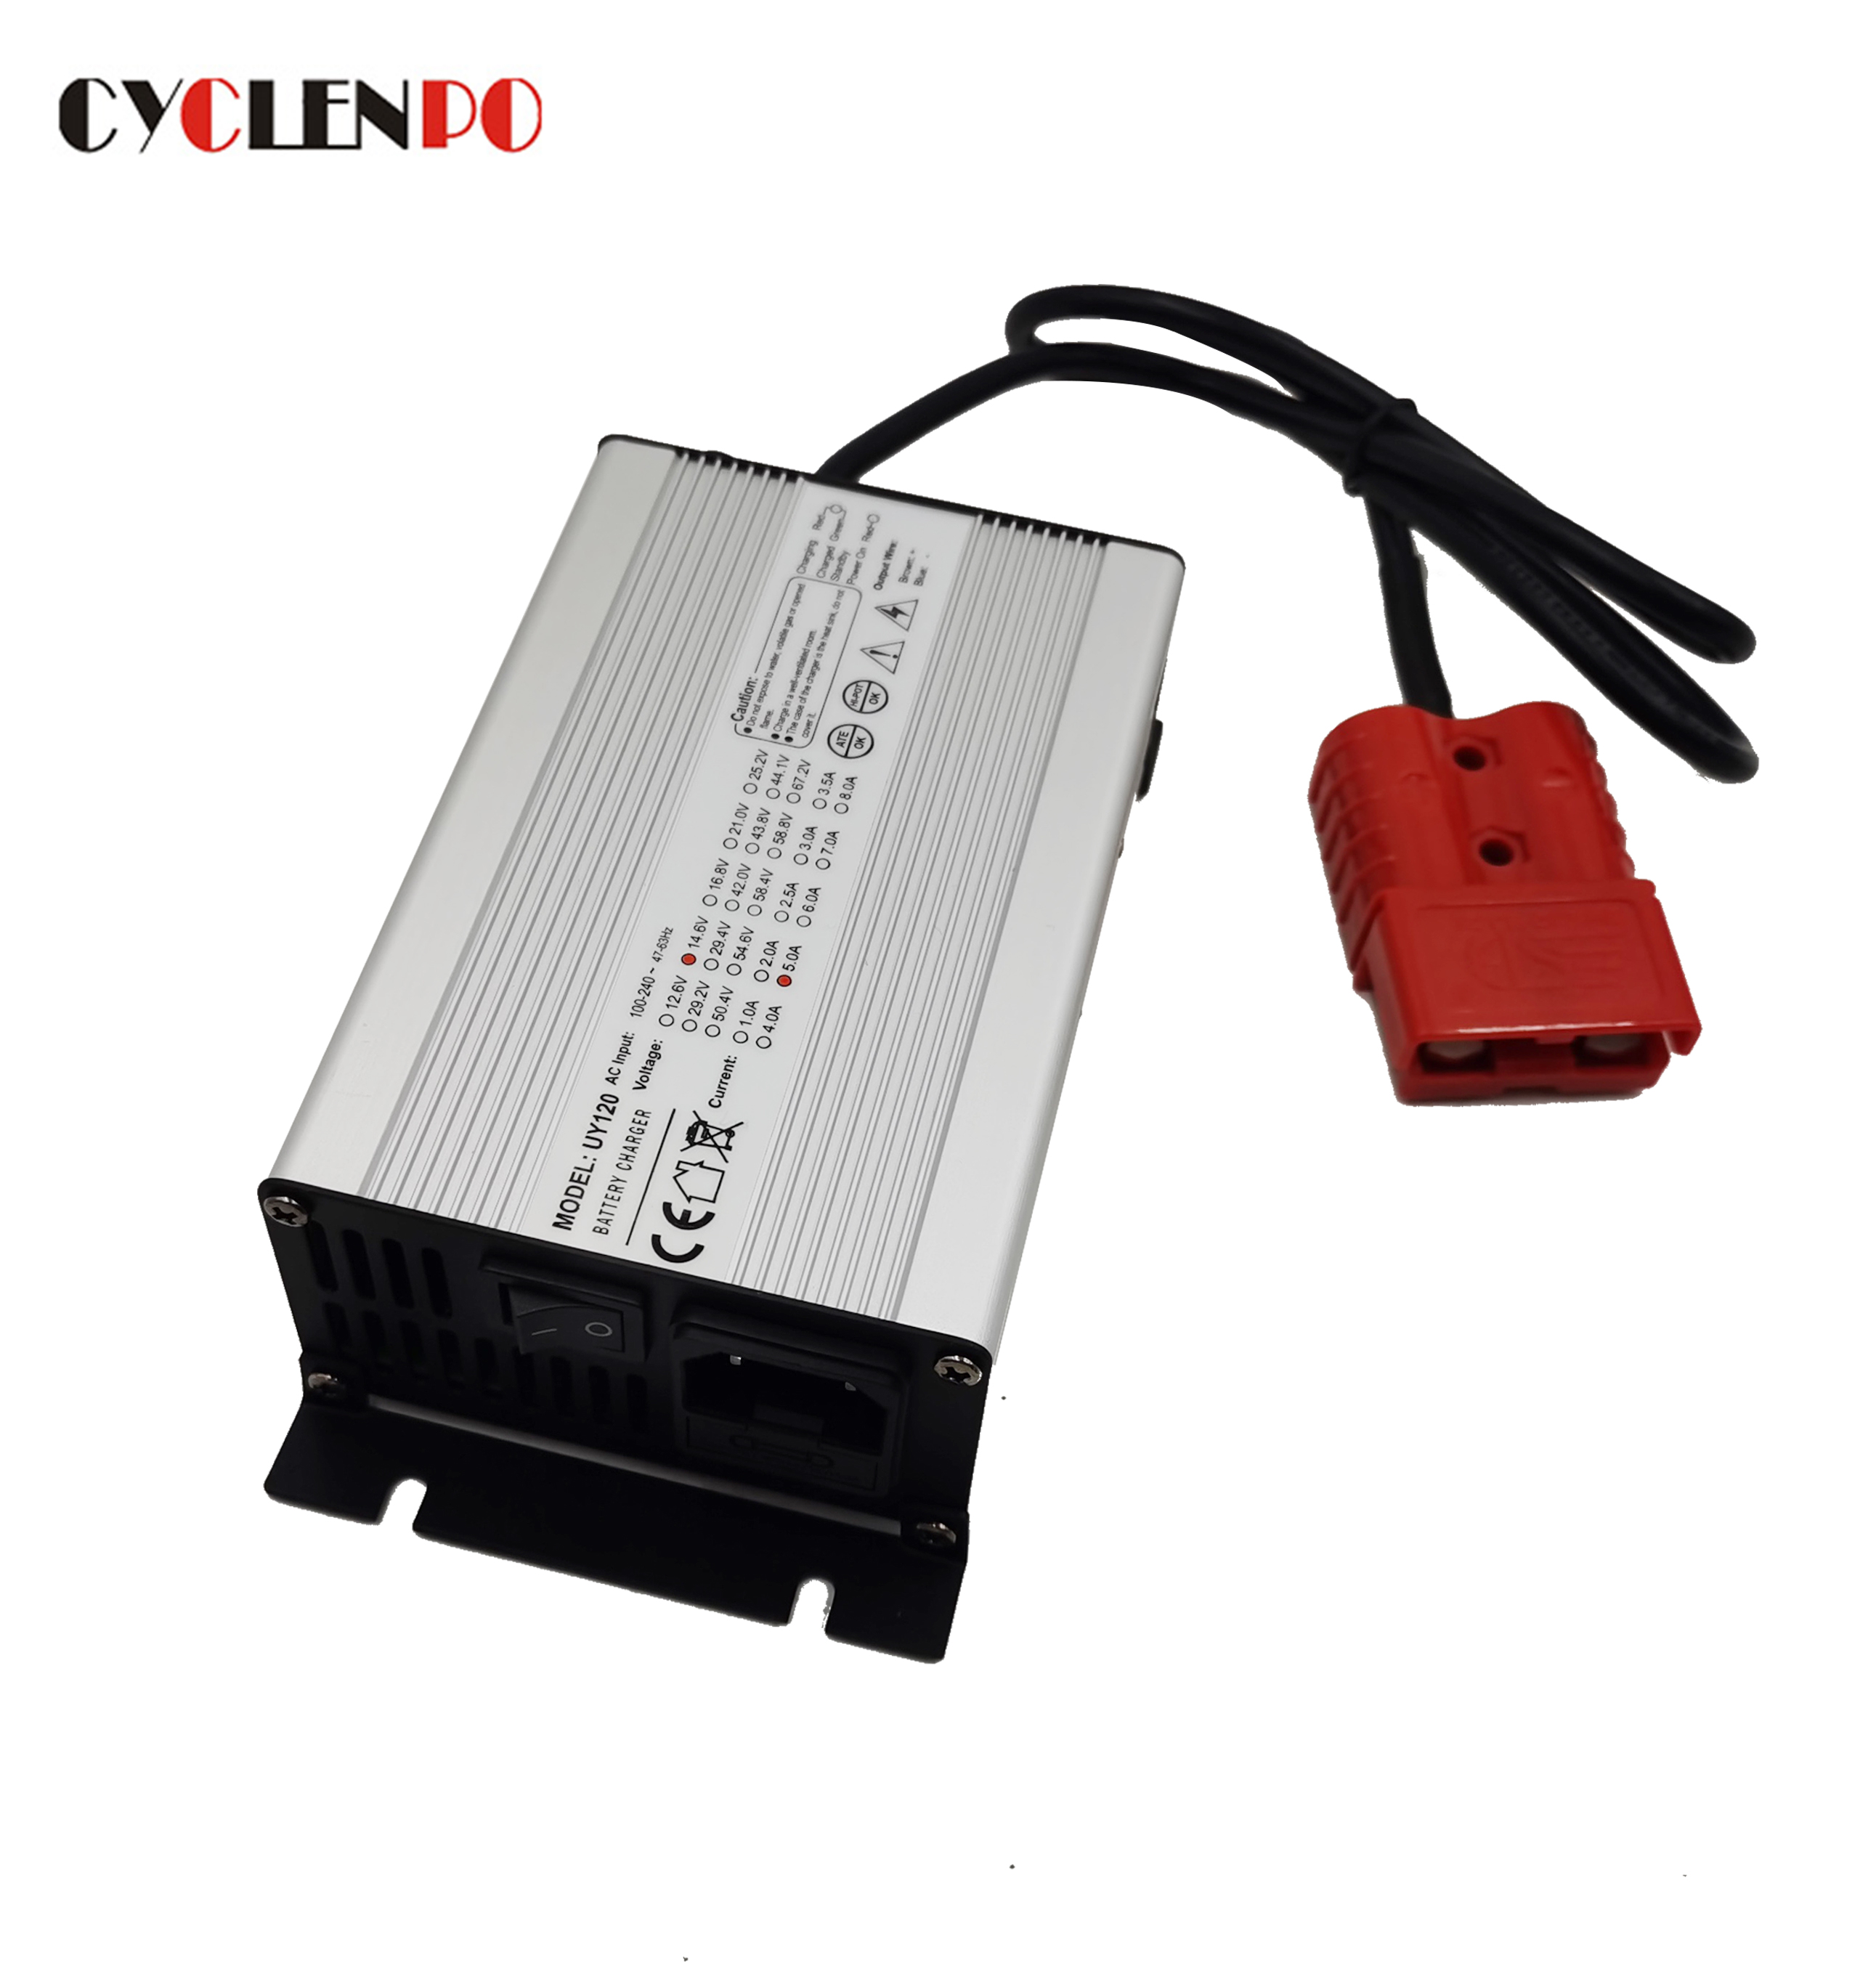 Lithium Iron Phosphate Battery Charger 12V 5A